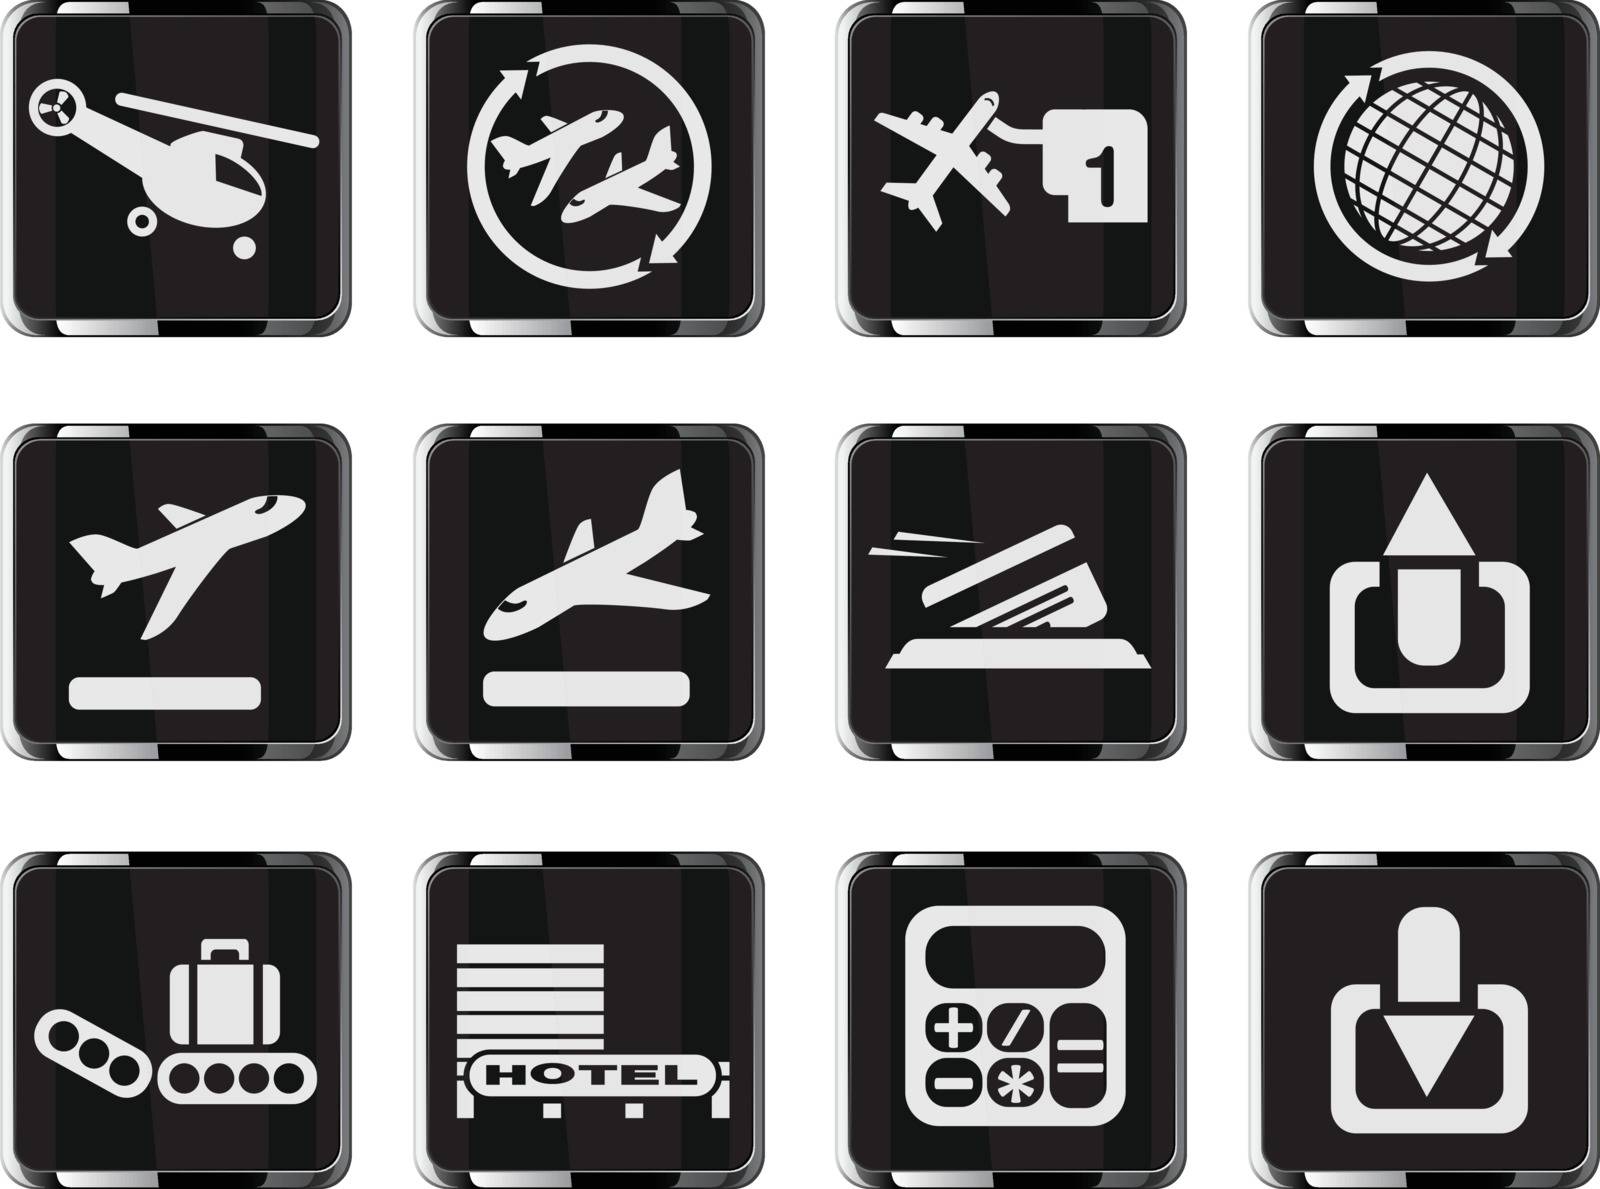 Airport  simply symbols for web and user interface